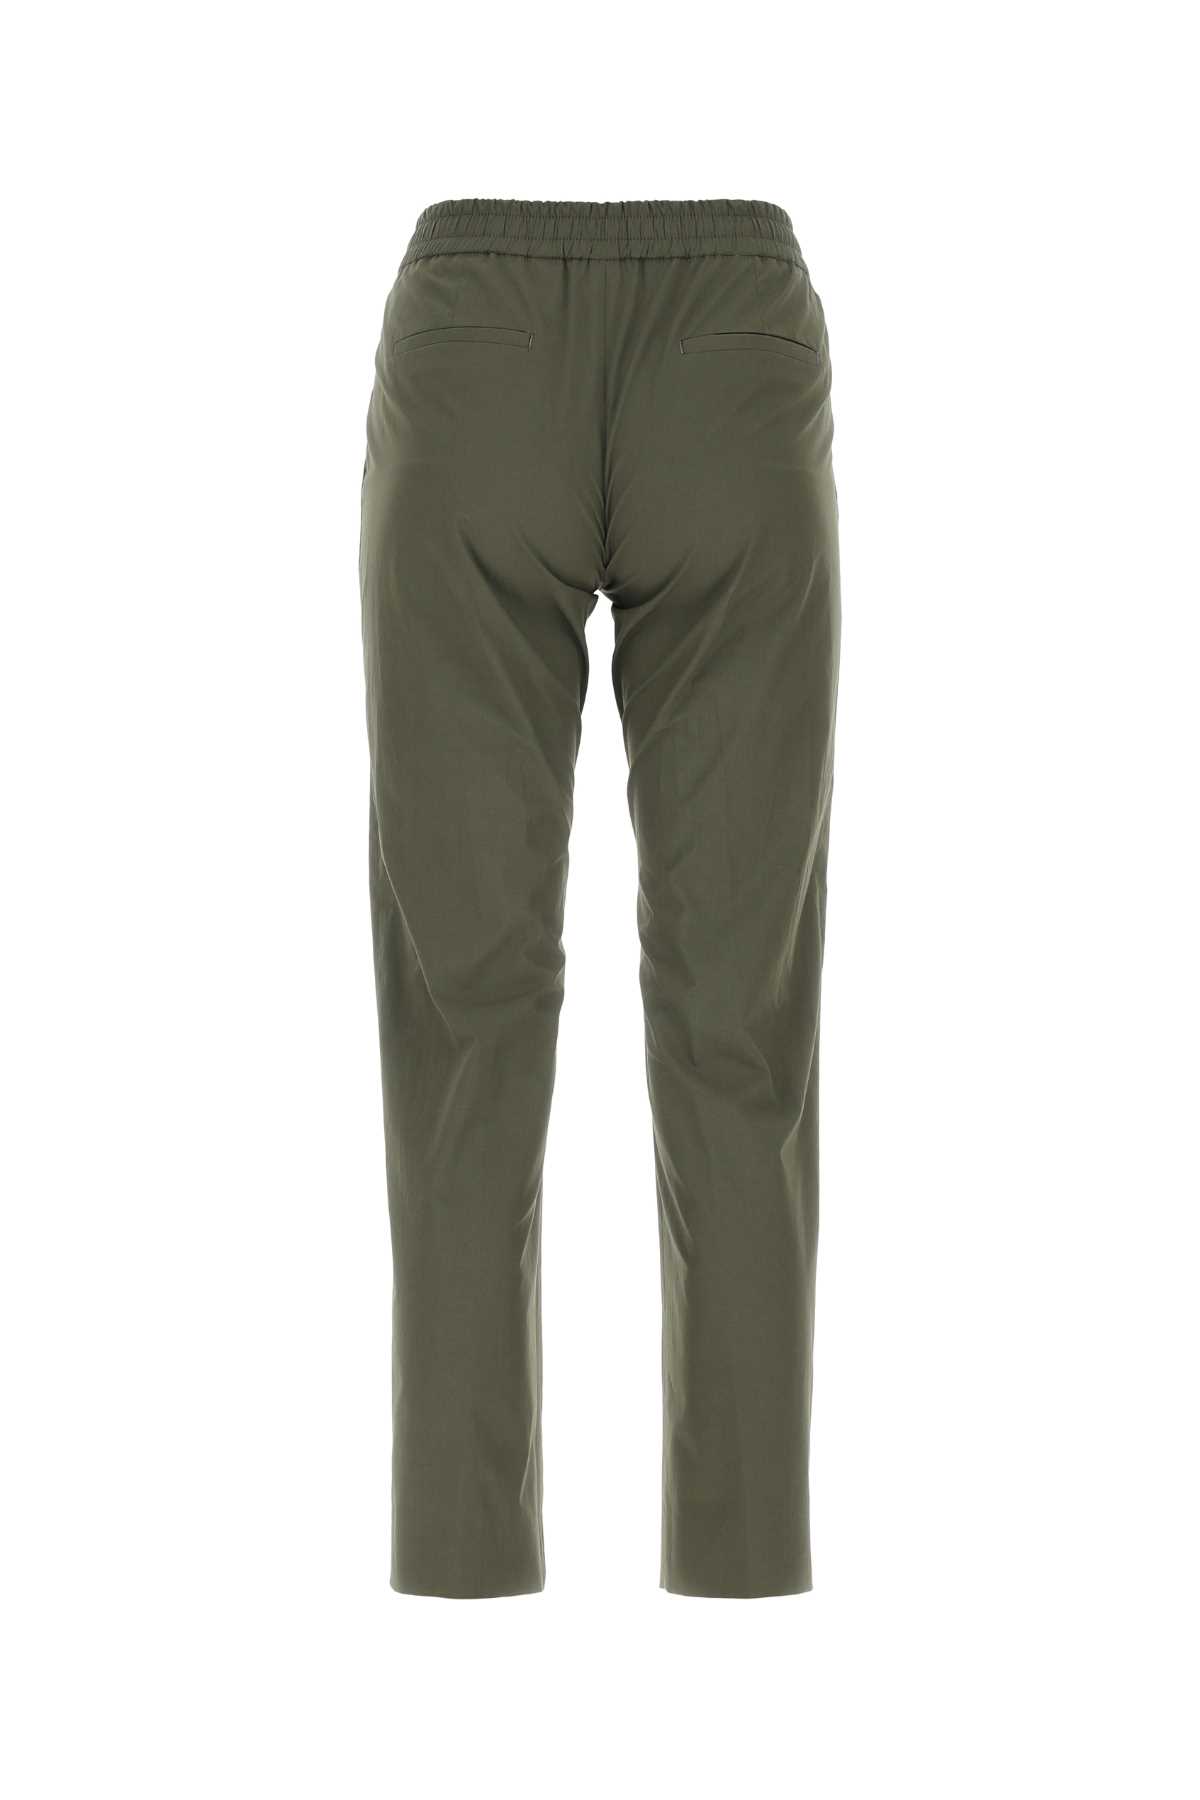 Pt01 Army Green Stretch Linen Blend Erika Pant In 0445